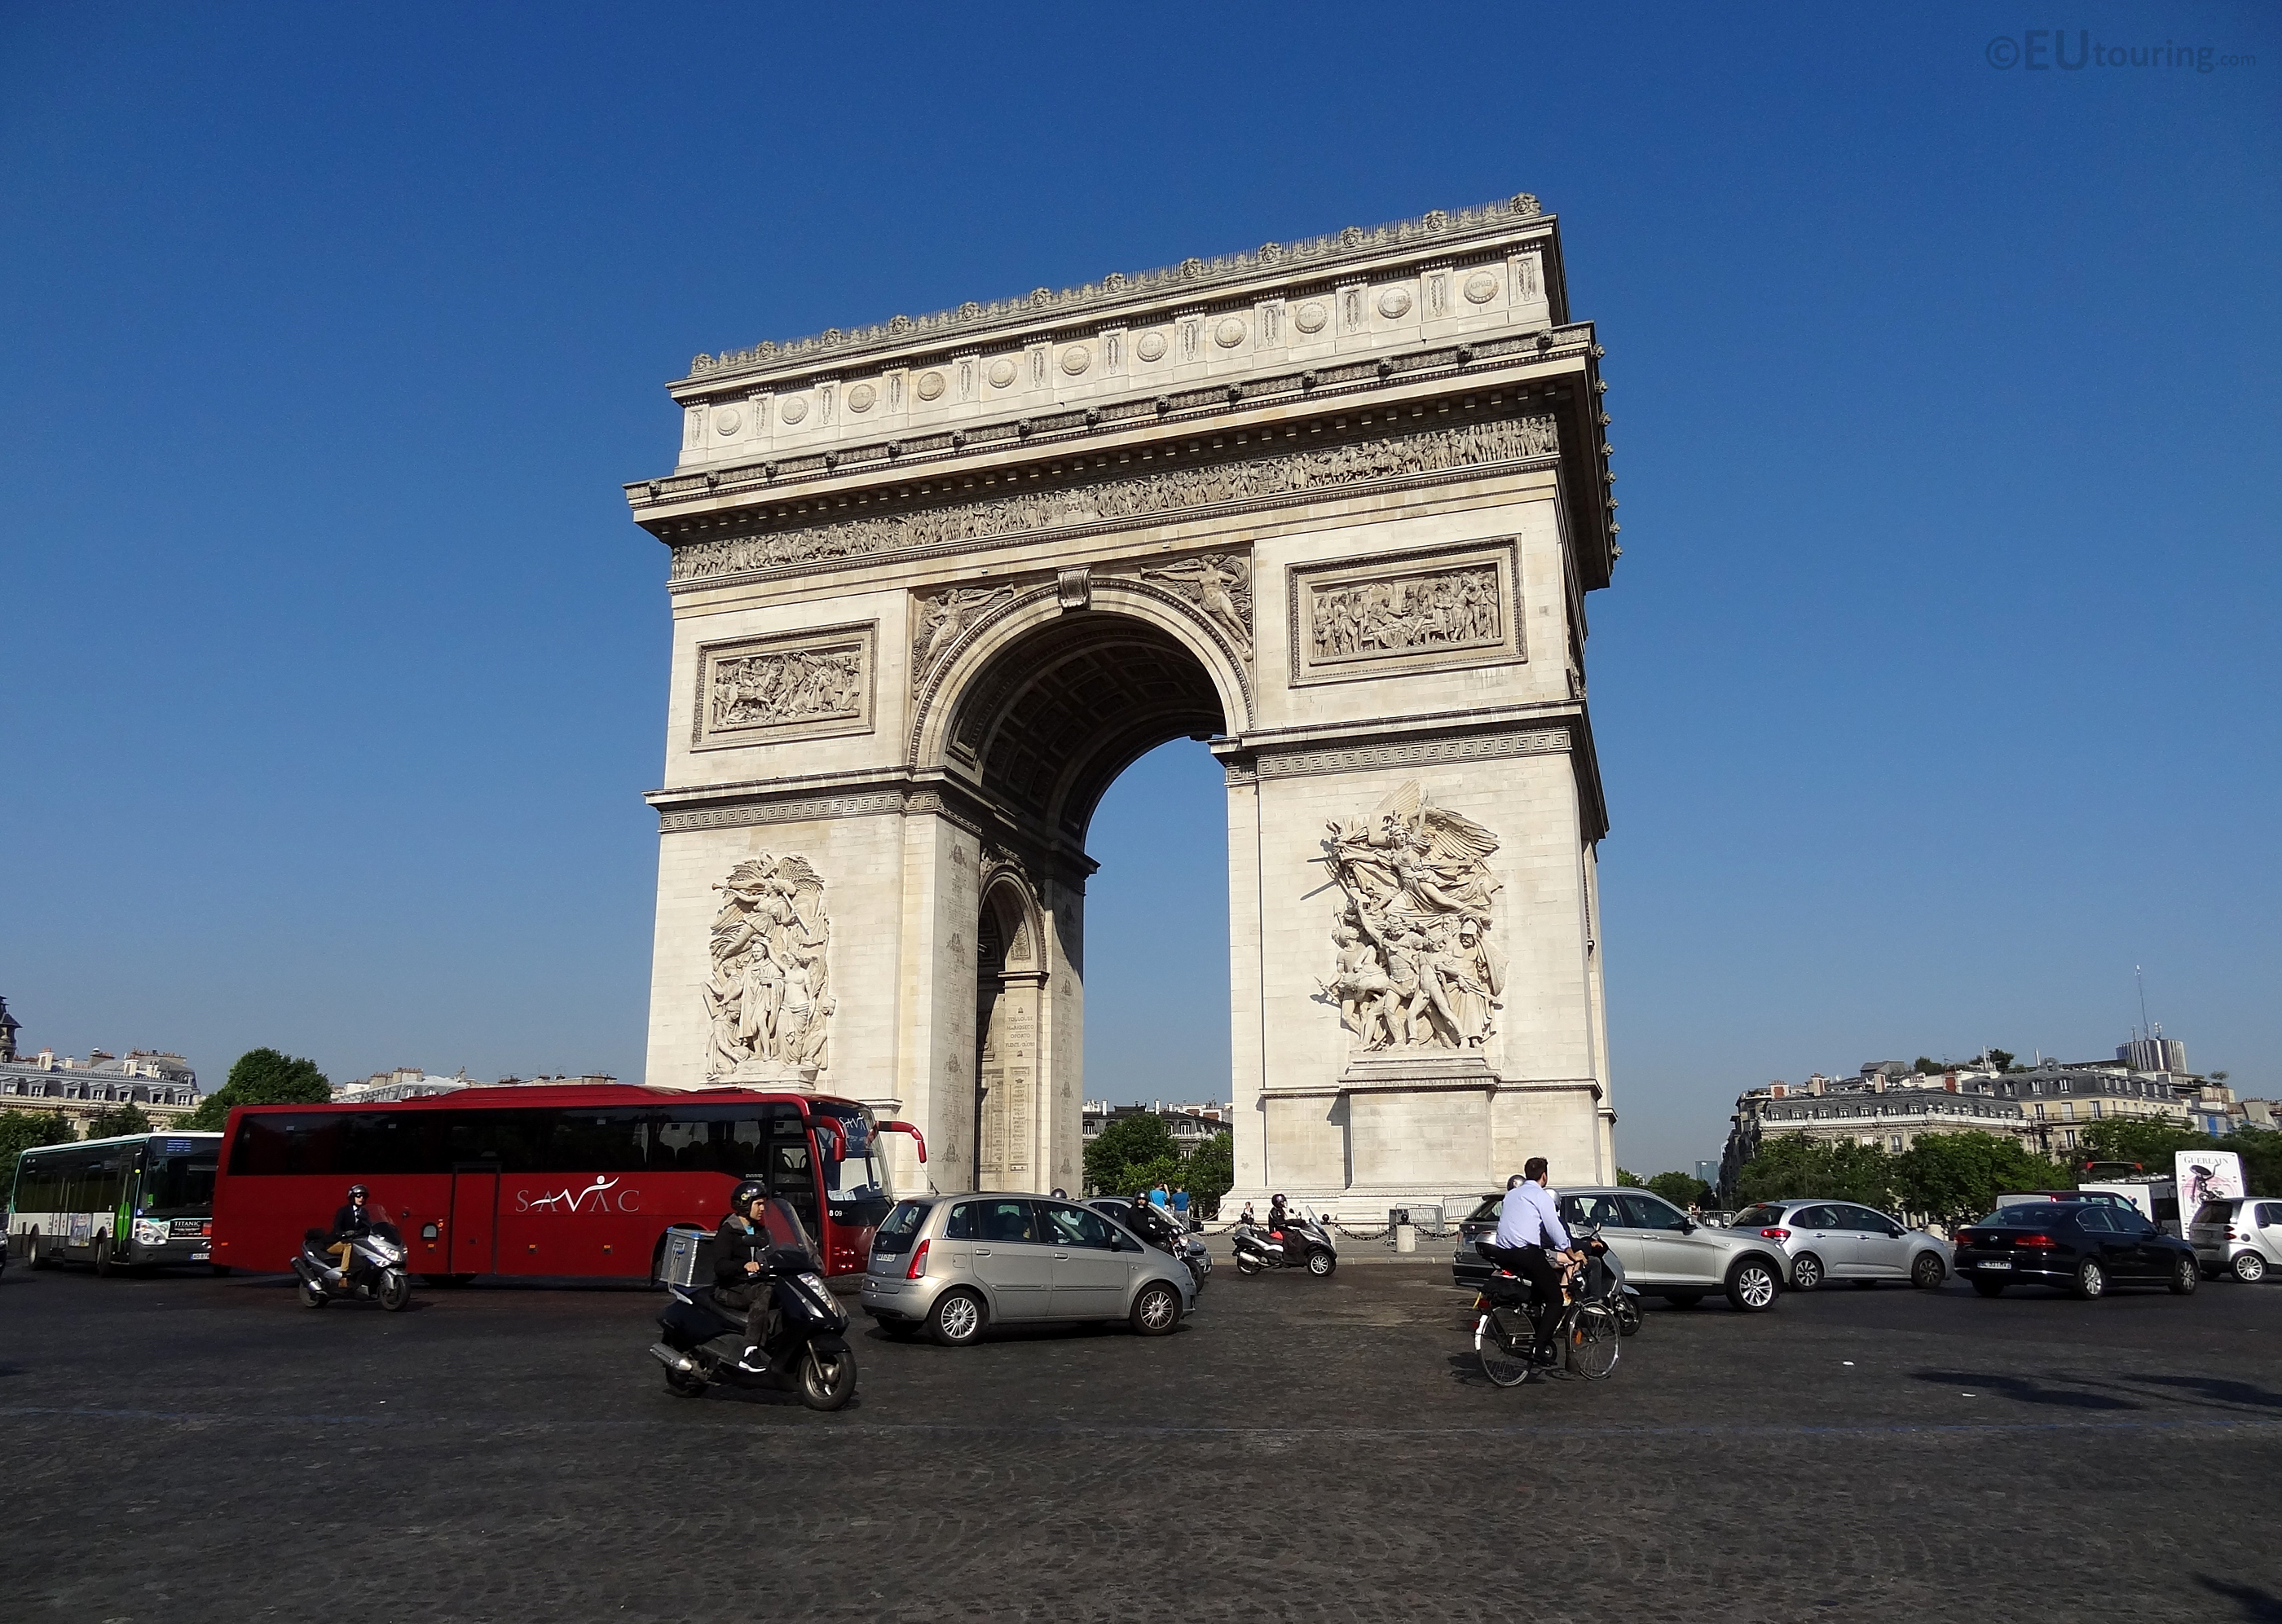 The Arc de Triomphe and traffic